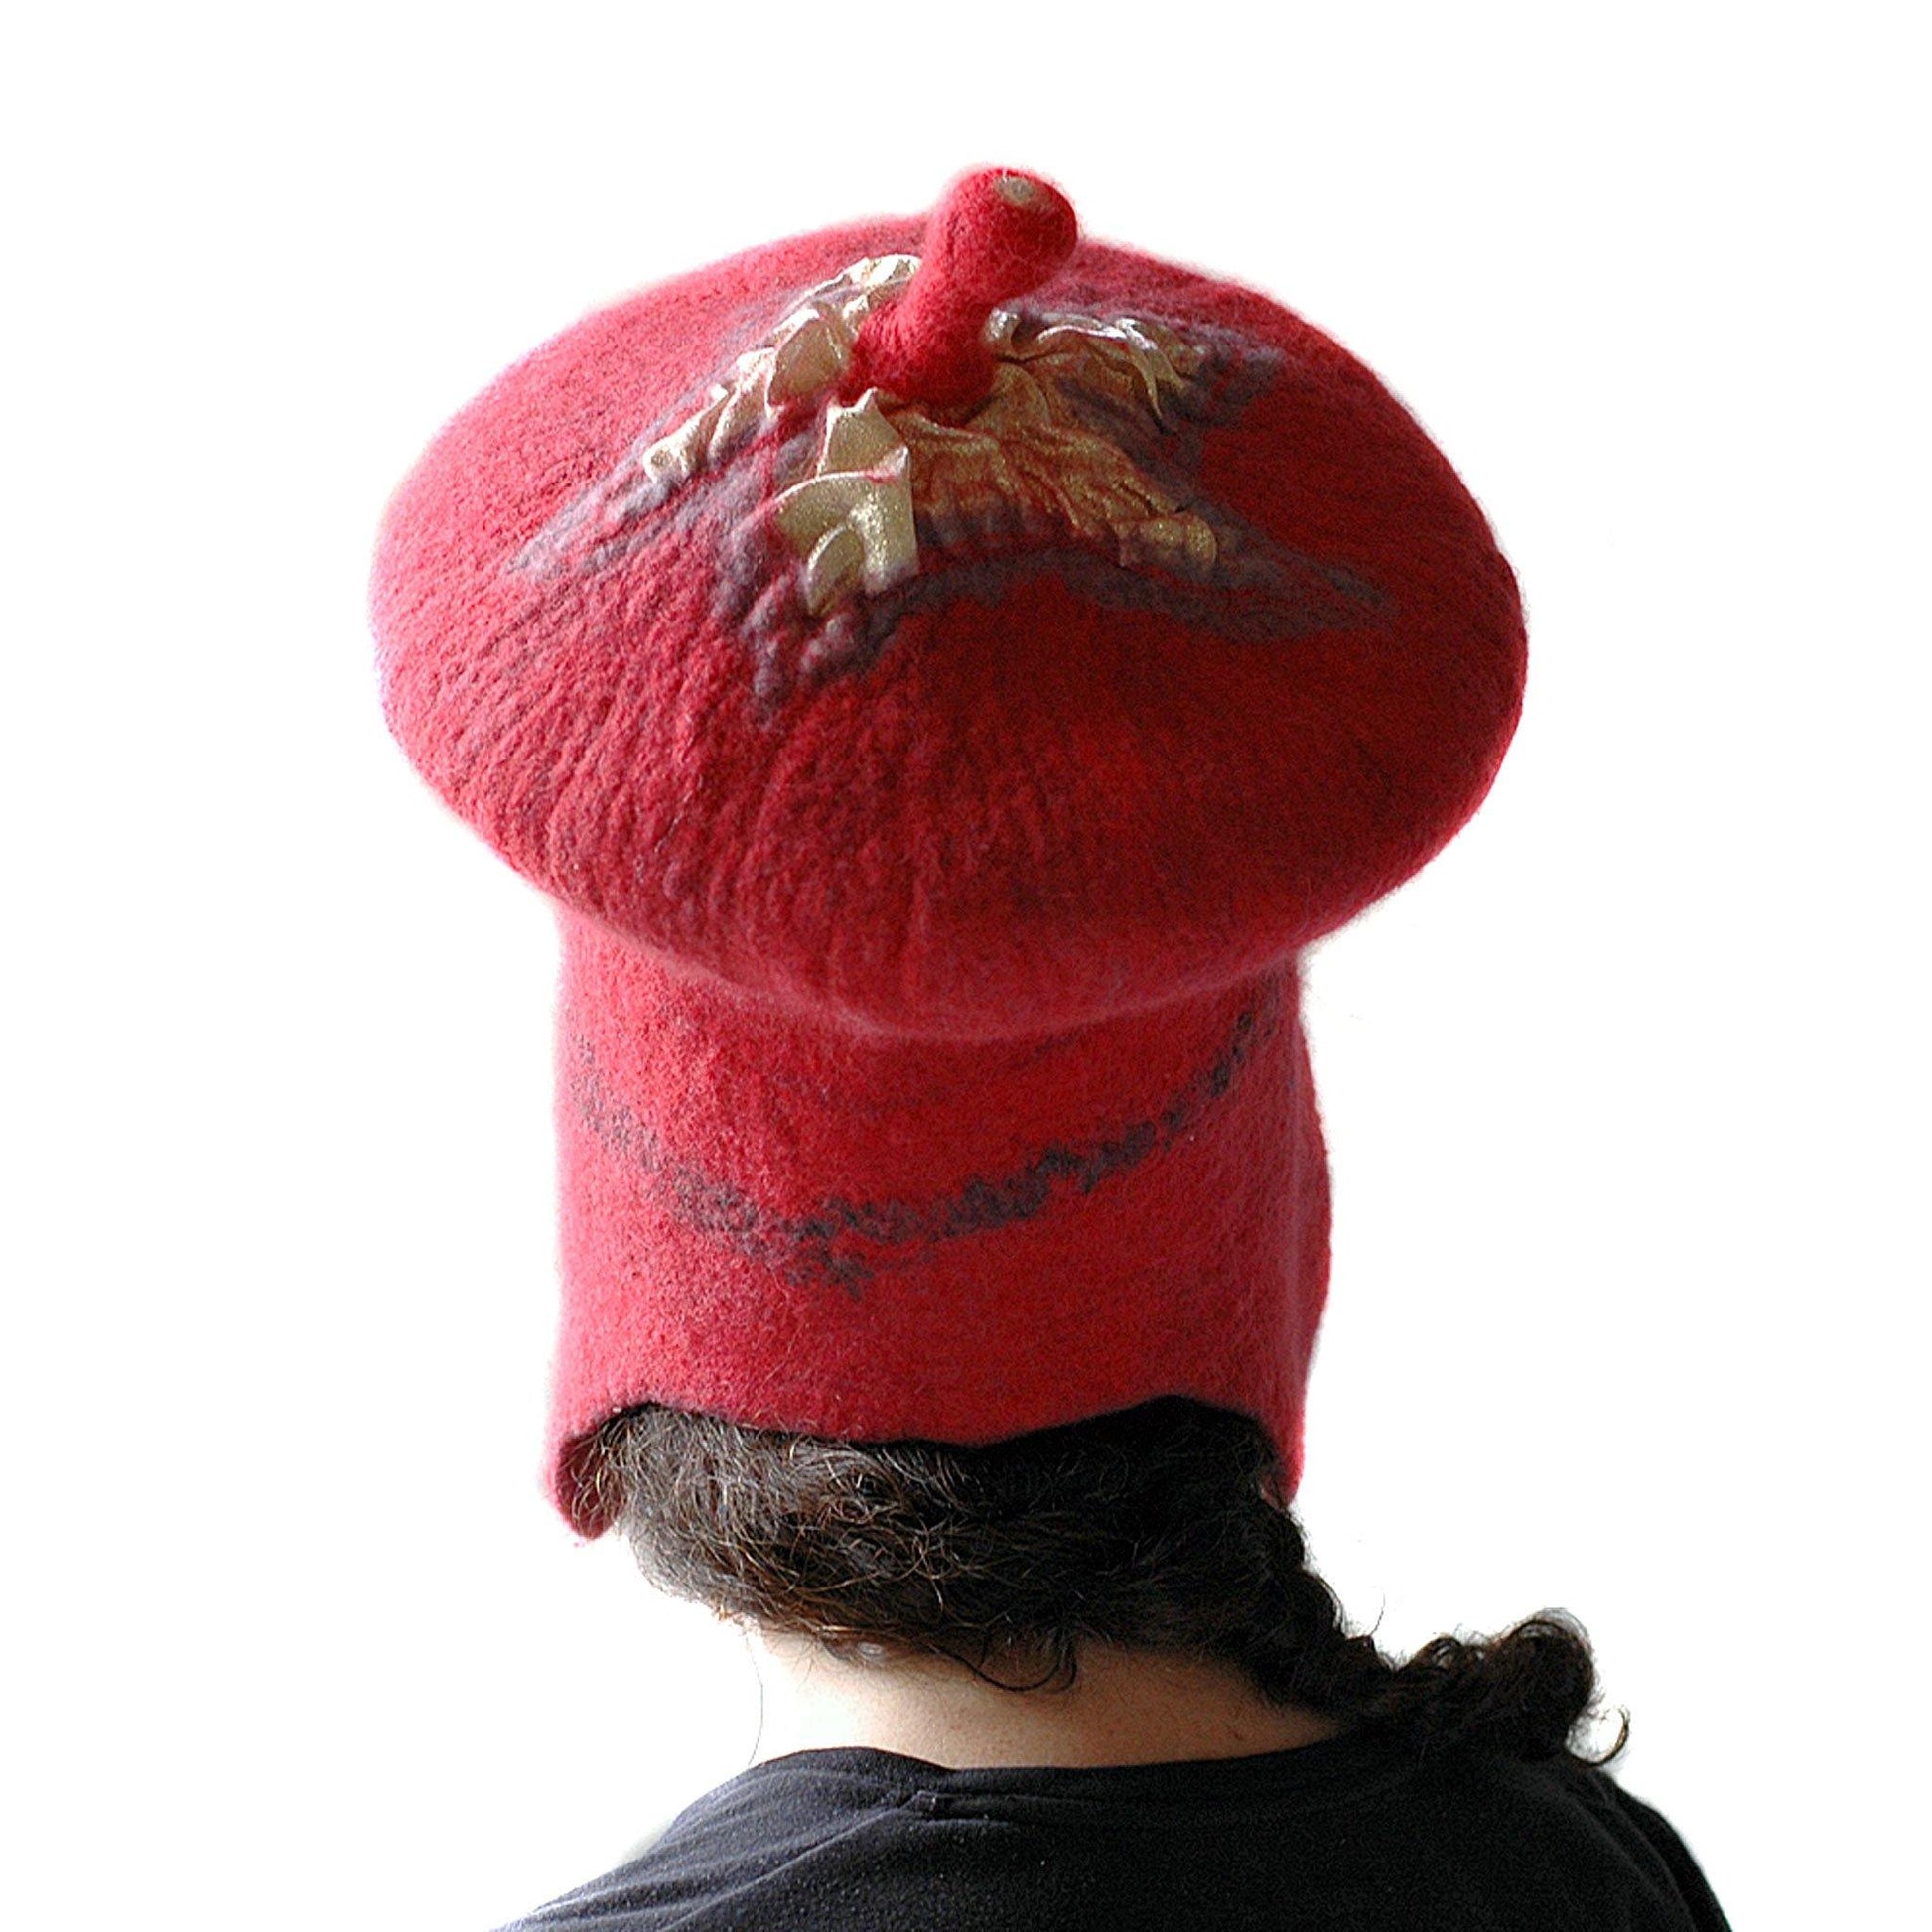 Watermelon Red Sci Fi Mushroom Wizard Hat with Earflaps - back view